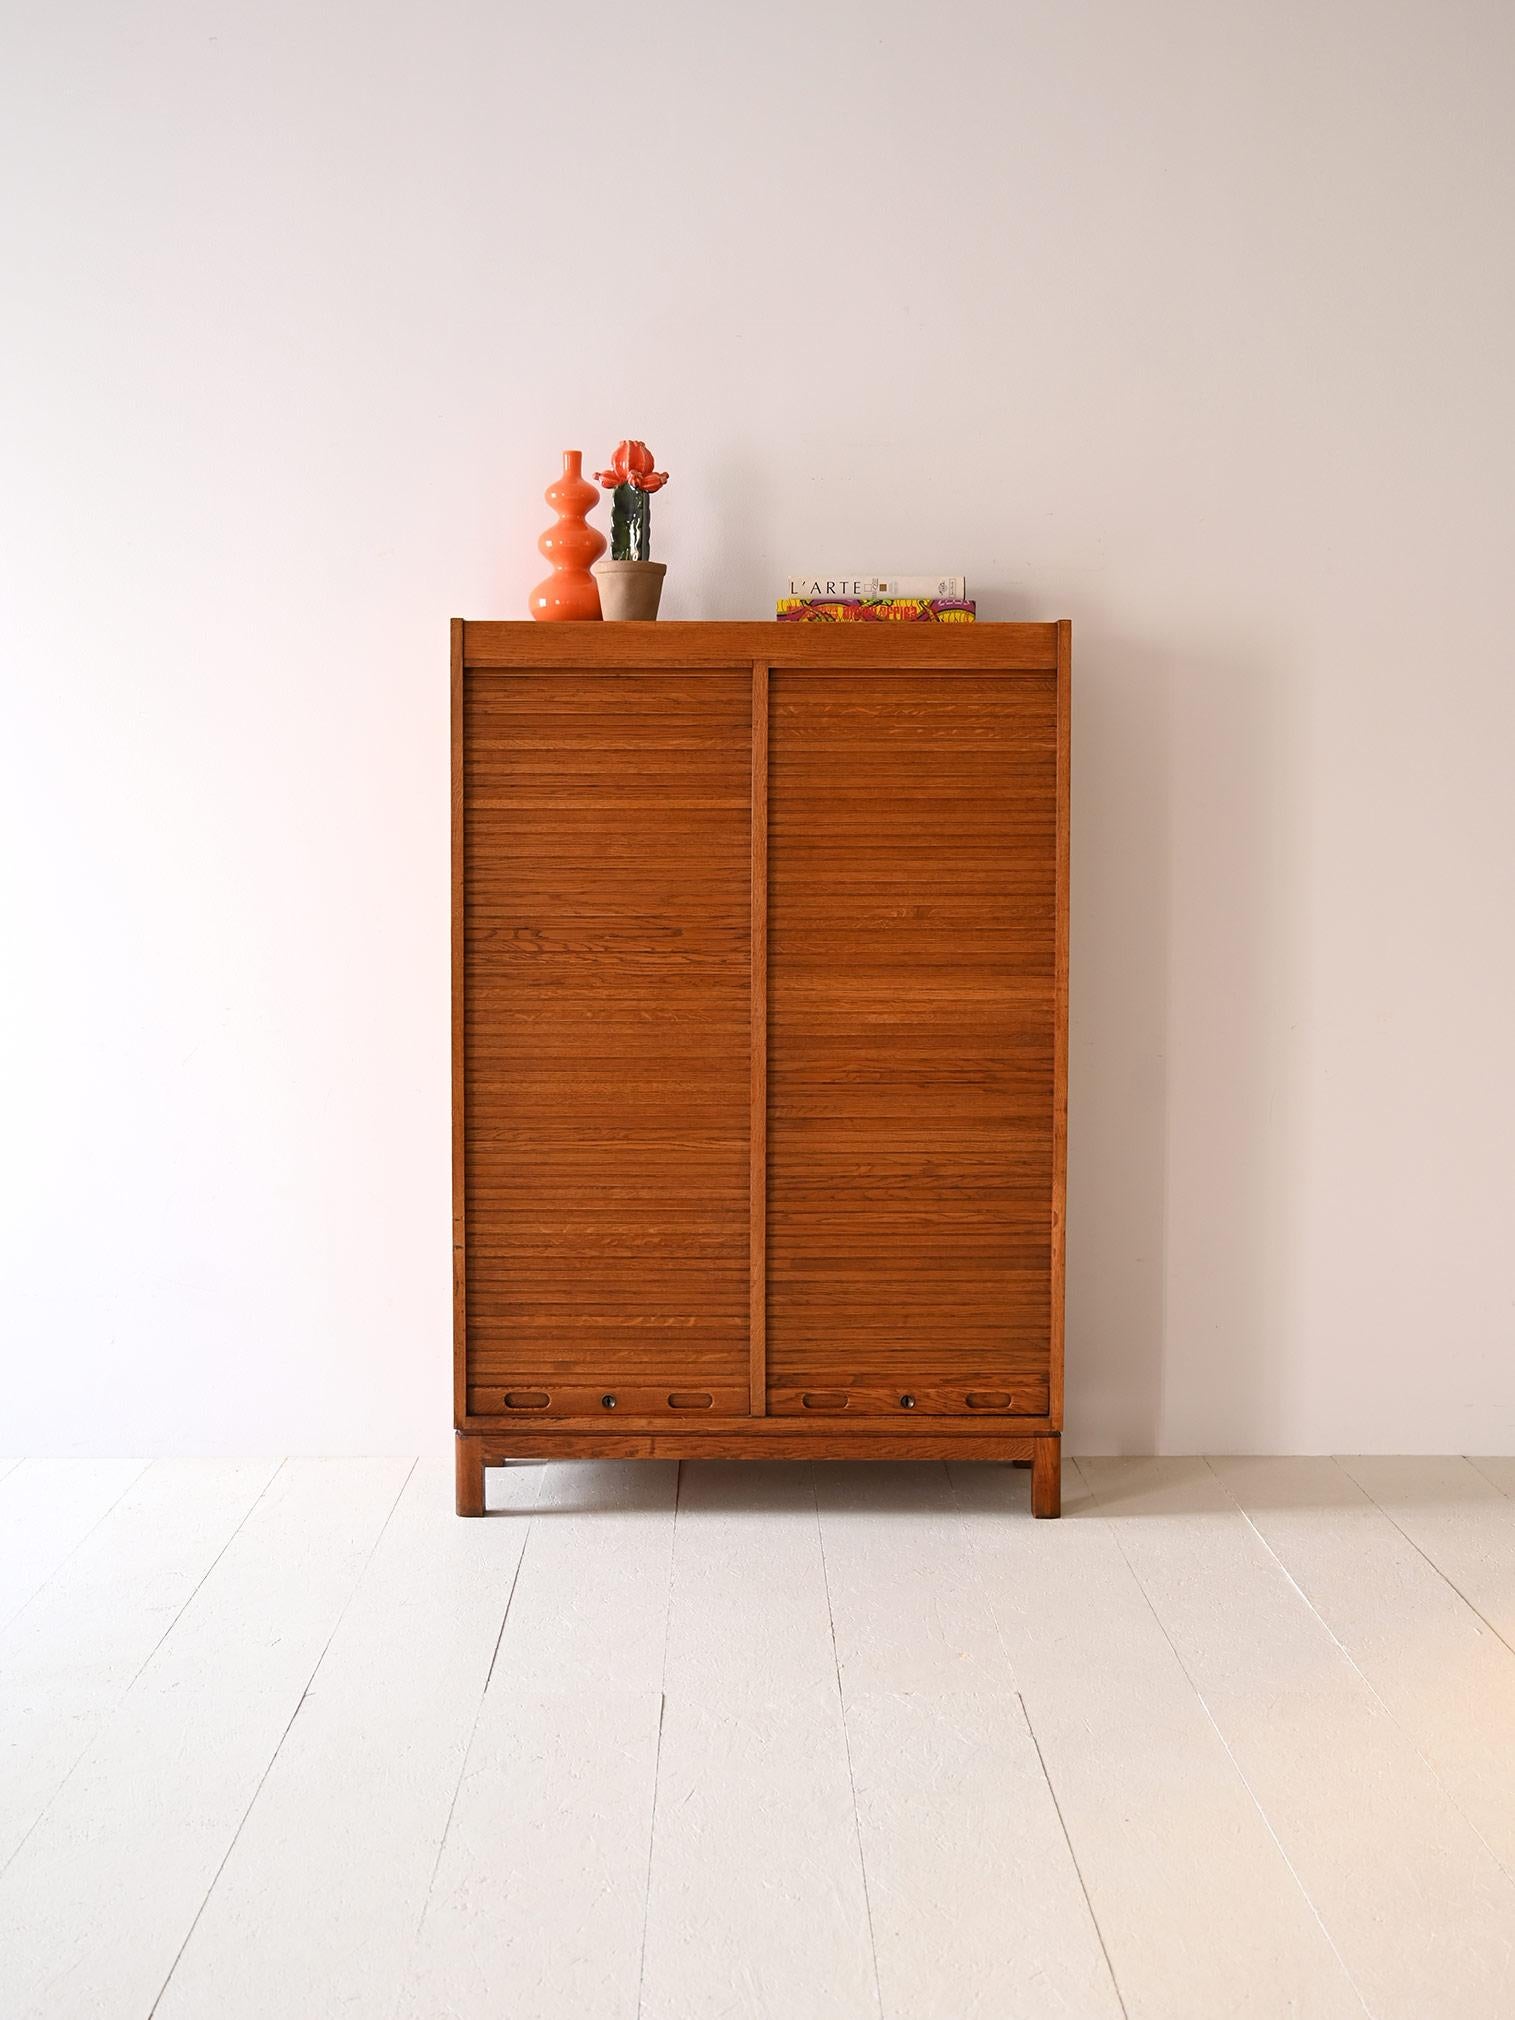 Original Scandinavian filing cabinet with drawers.
 
This beautiful office cabinet is distinguished by the presence of two shutter doors concealing the drawers.
The oak wood frame makes it a solid and durable piece that is also well suited for use